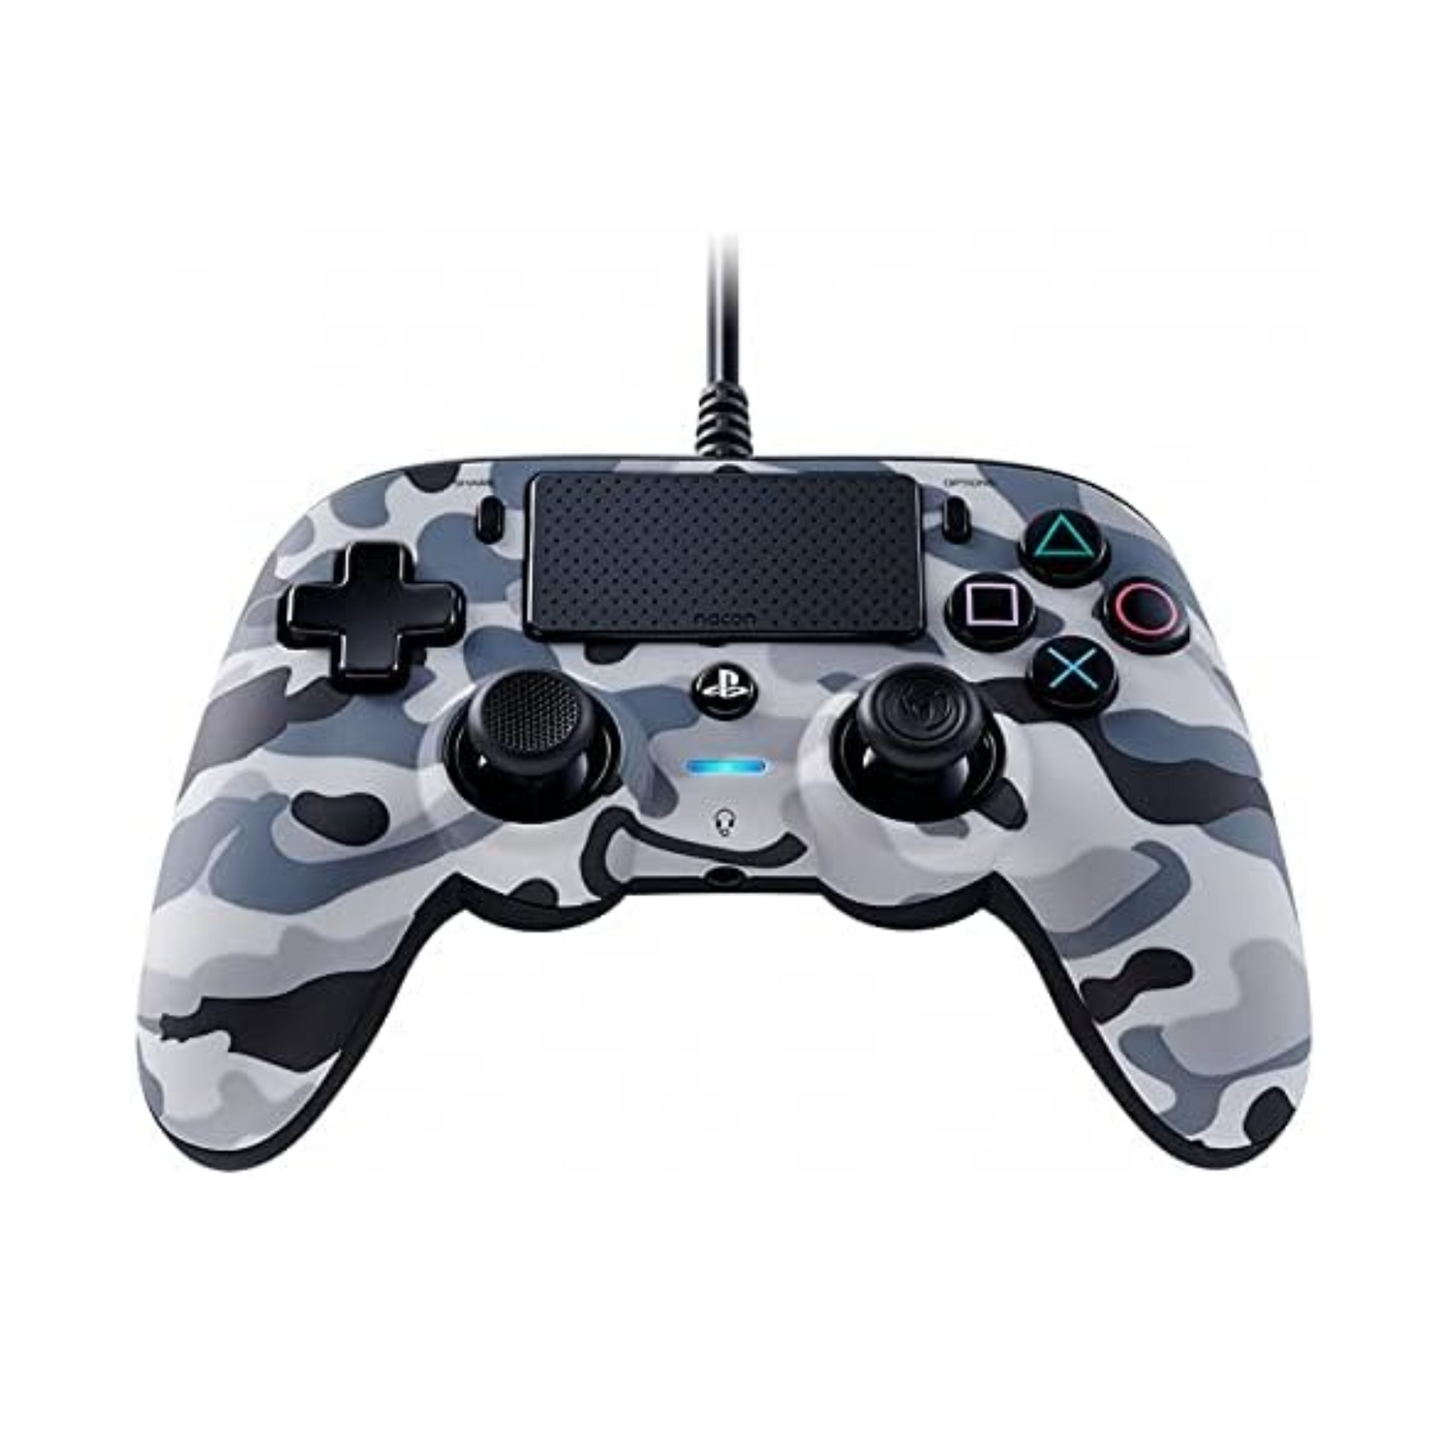 Nacon Wired Compact Controller for Playstation 4 - Grey Camo